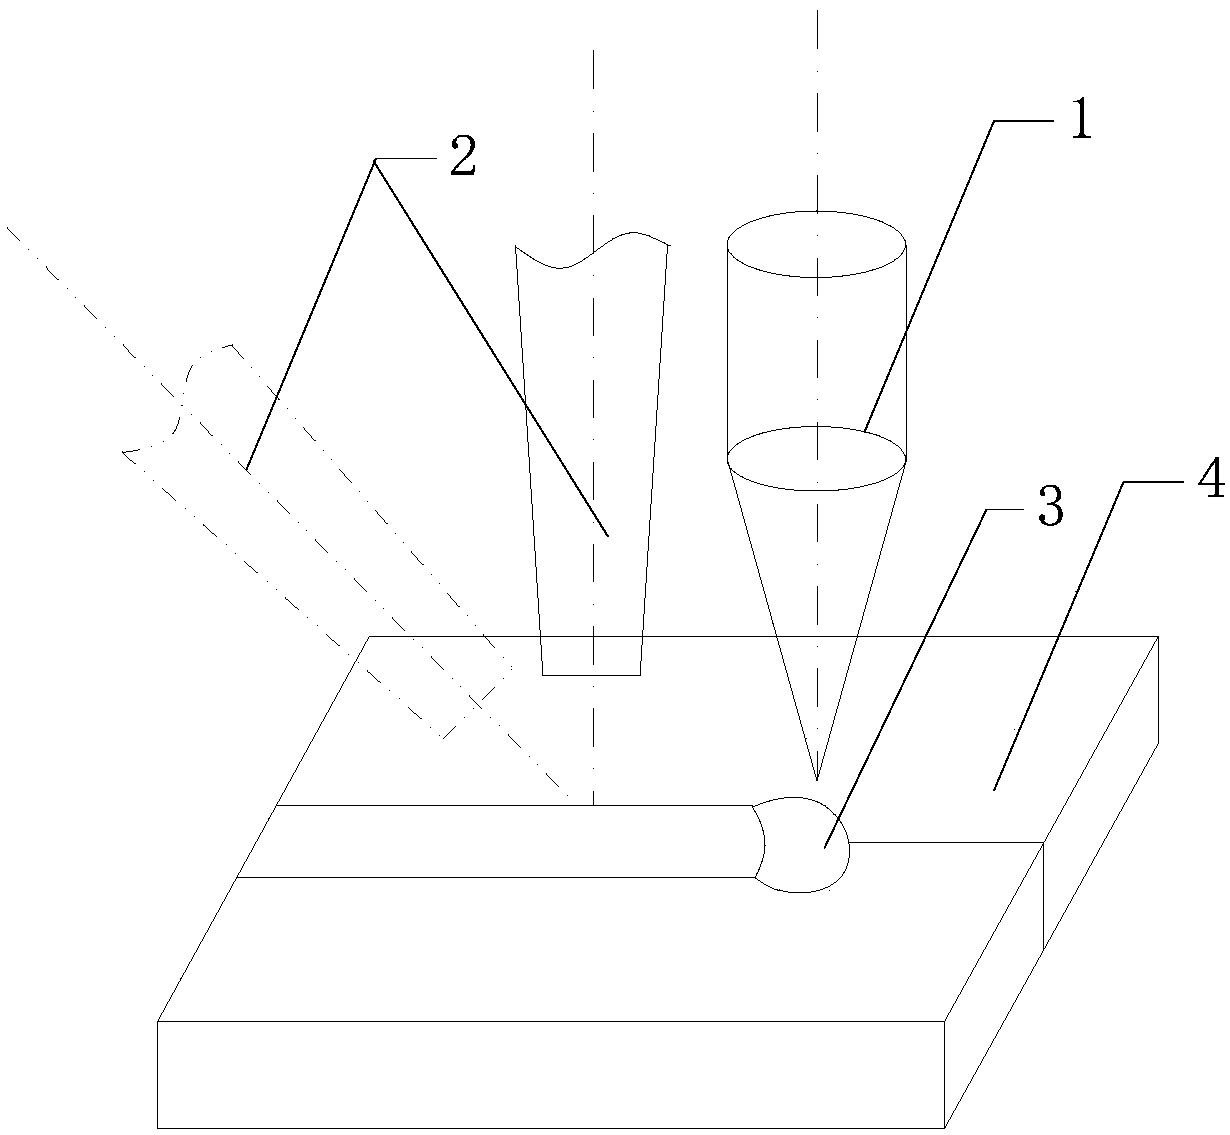 Metal double-laser-beam impact forging low-stress welding device and method